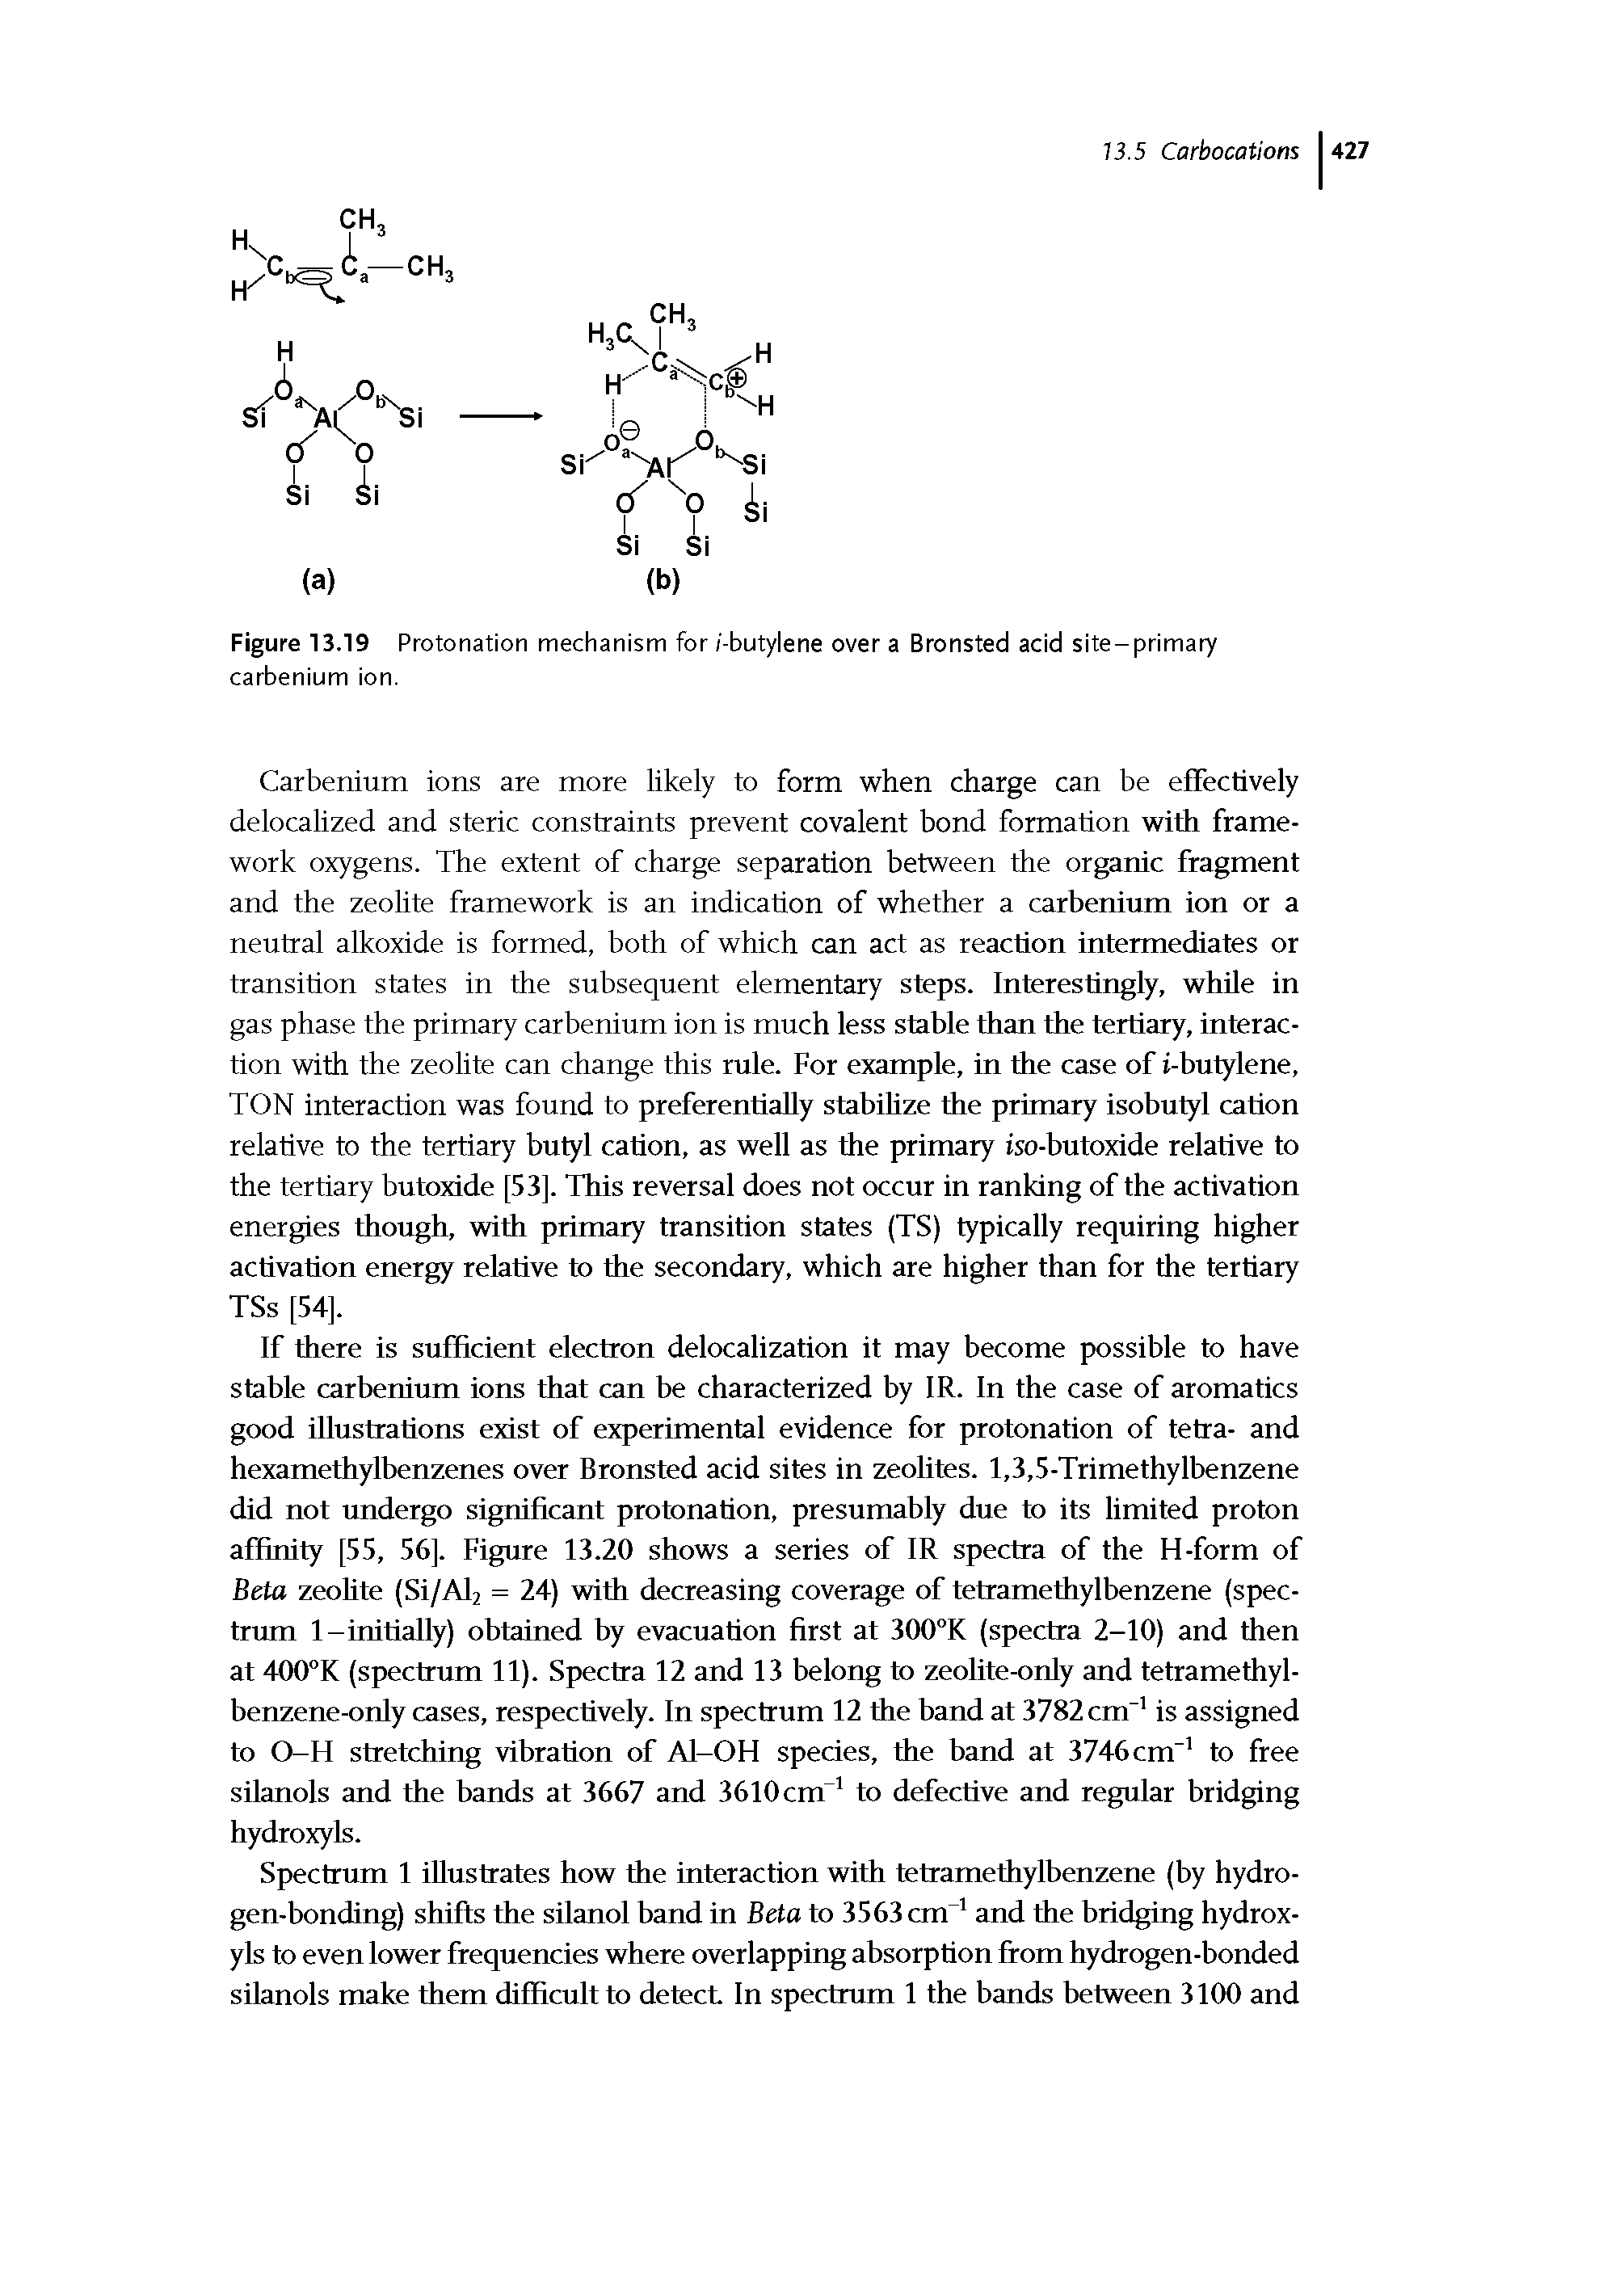 Figure 13.19 Protonation mechanism for /-butylene over a Bronsted acid site-primary carbenium ion.